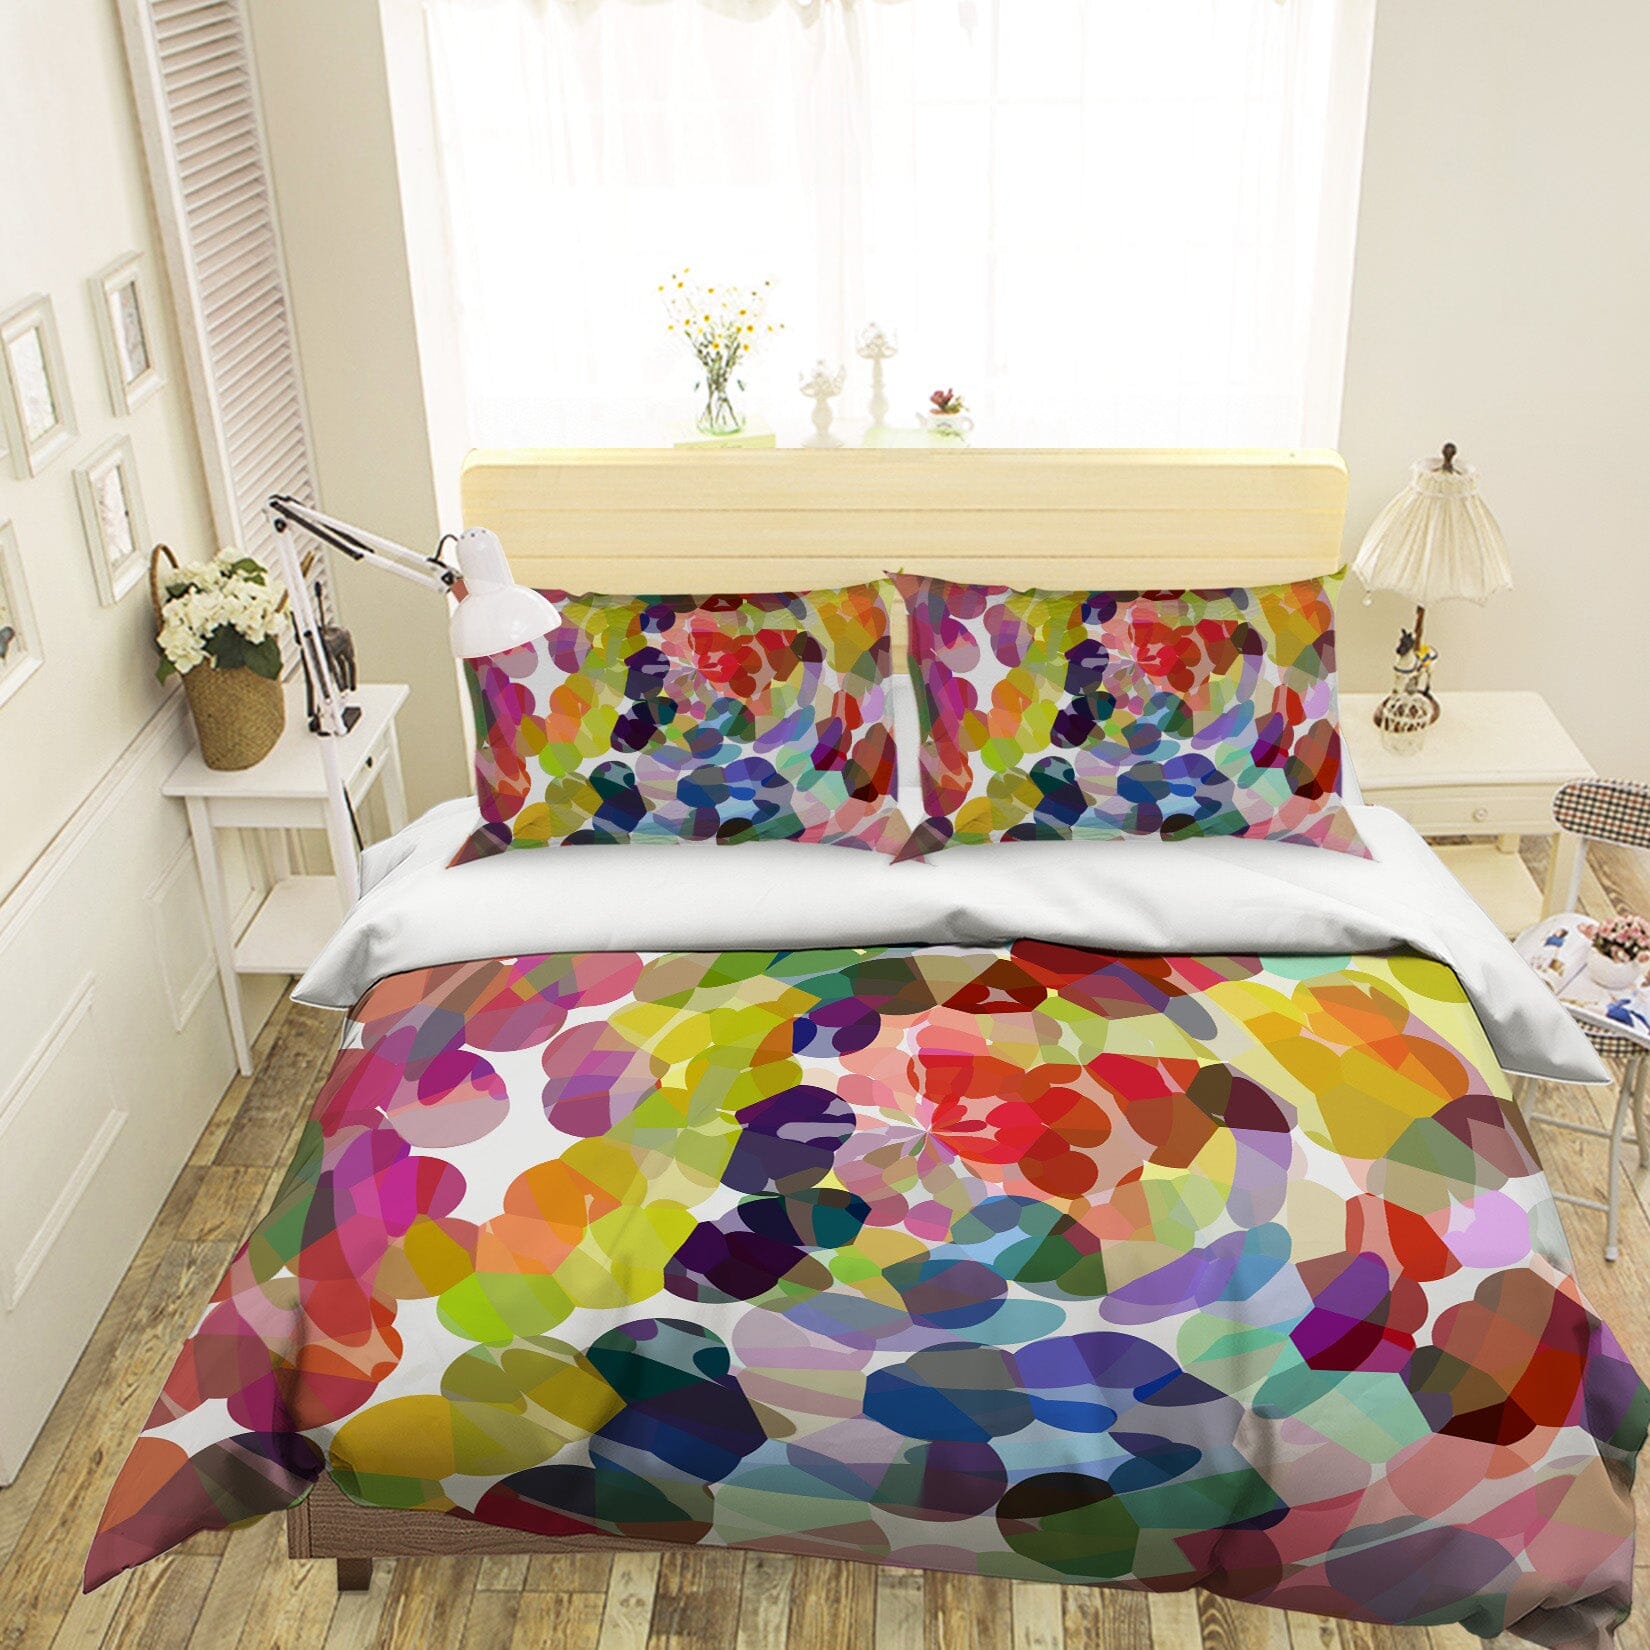 3D Colored Stones 2004 Shandra Smith Bedding Bed Pillowcases Quilt Quiet Covers AJ Creativity Home 